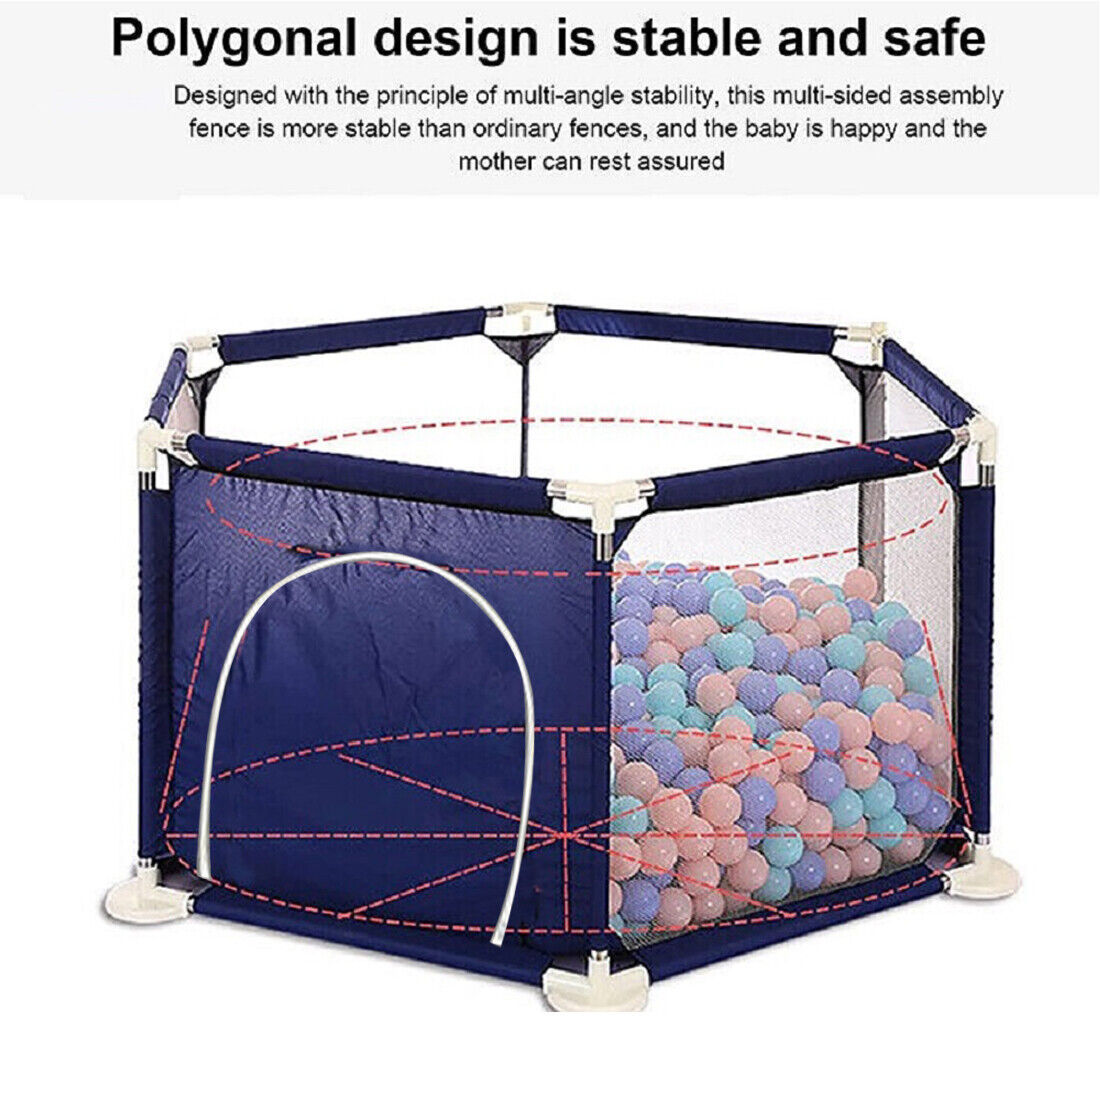 Large Baby Playpen Kids Toddlers Infant Activity Center Saftety Play Fence Yard